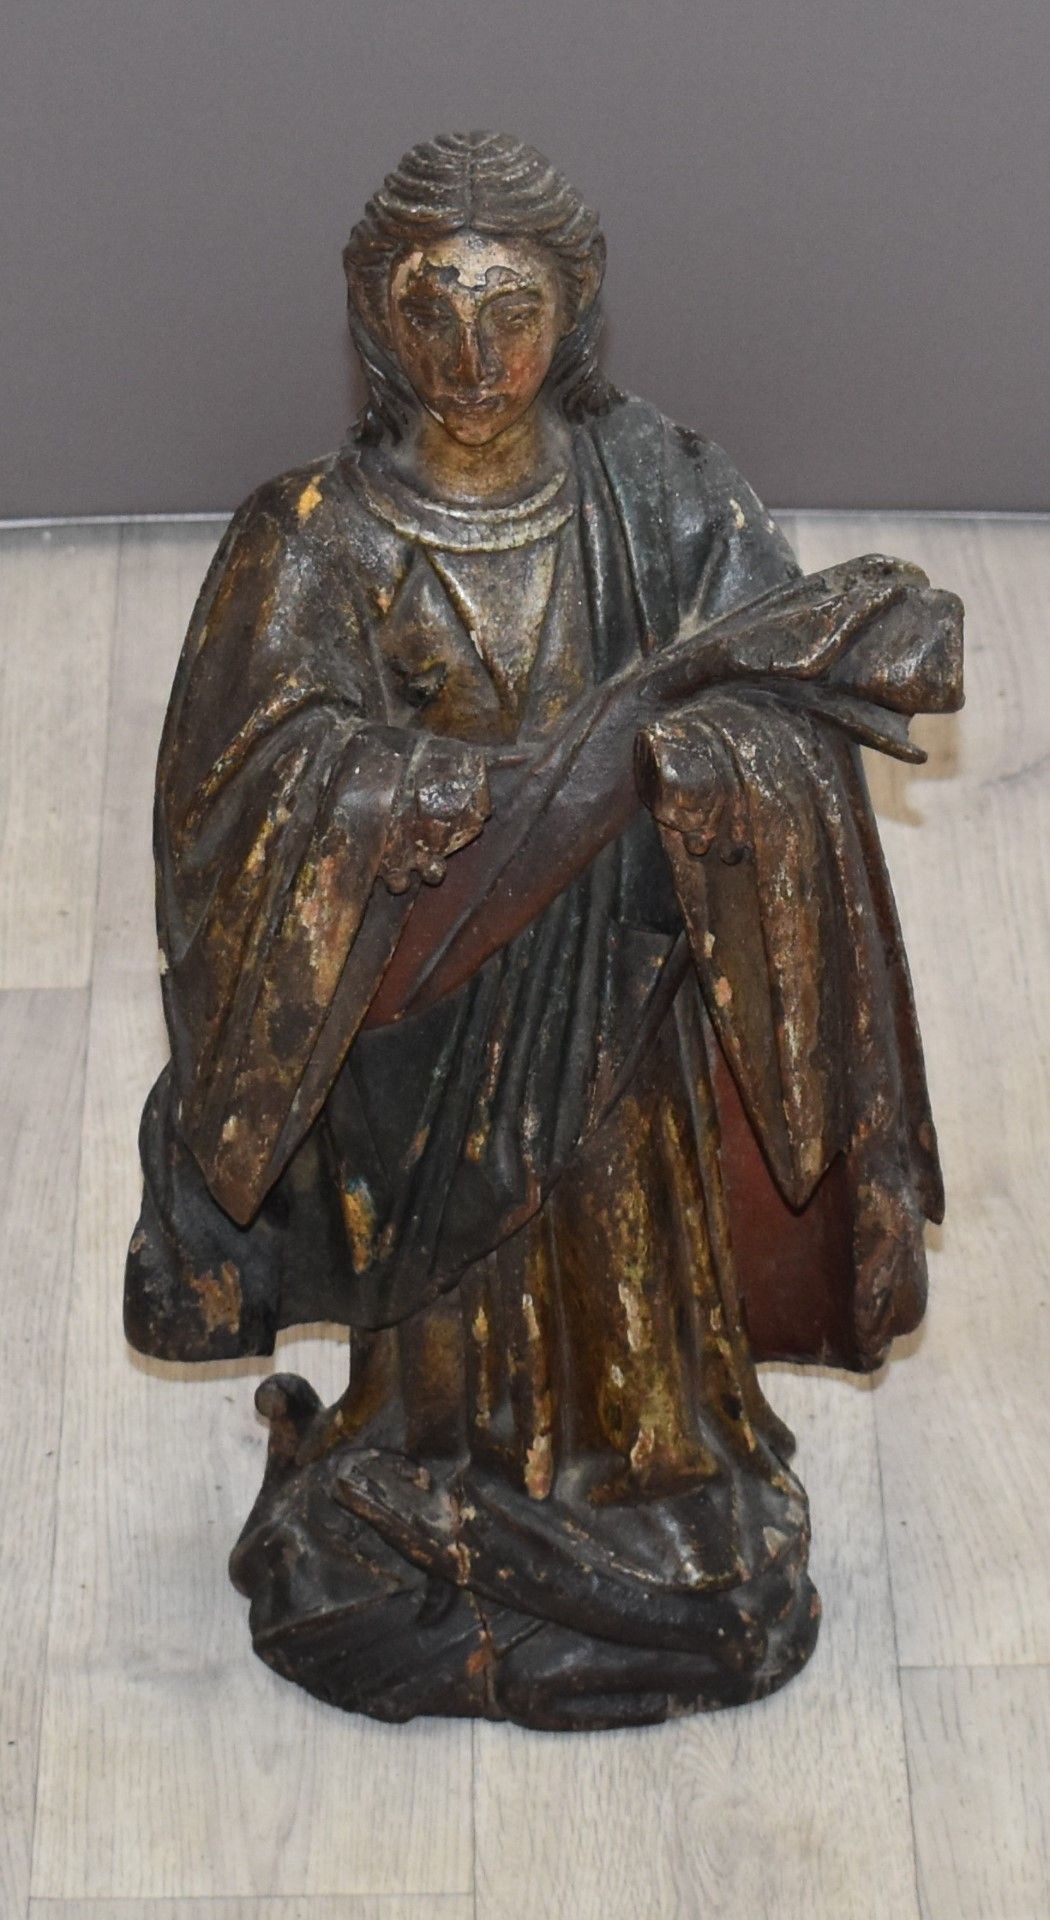 18th/19thC continental painted and gilt carved wooden figure, possibly ecclesiastical, H49cm - Image 2 of 2